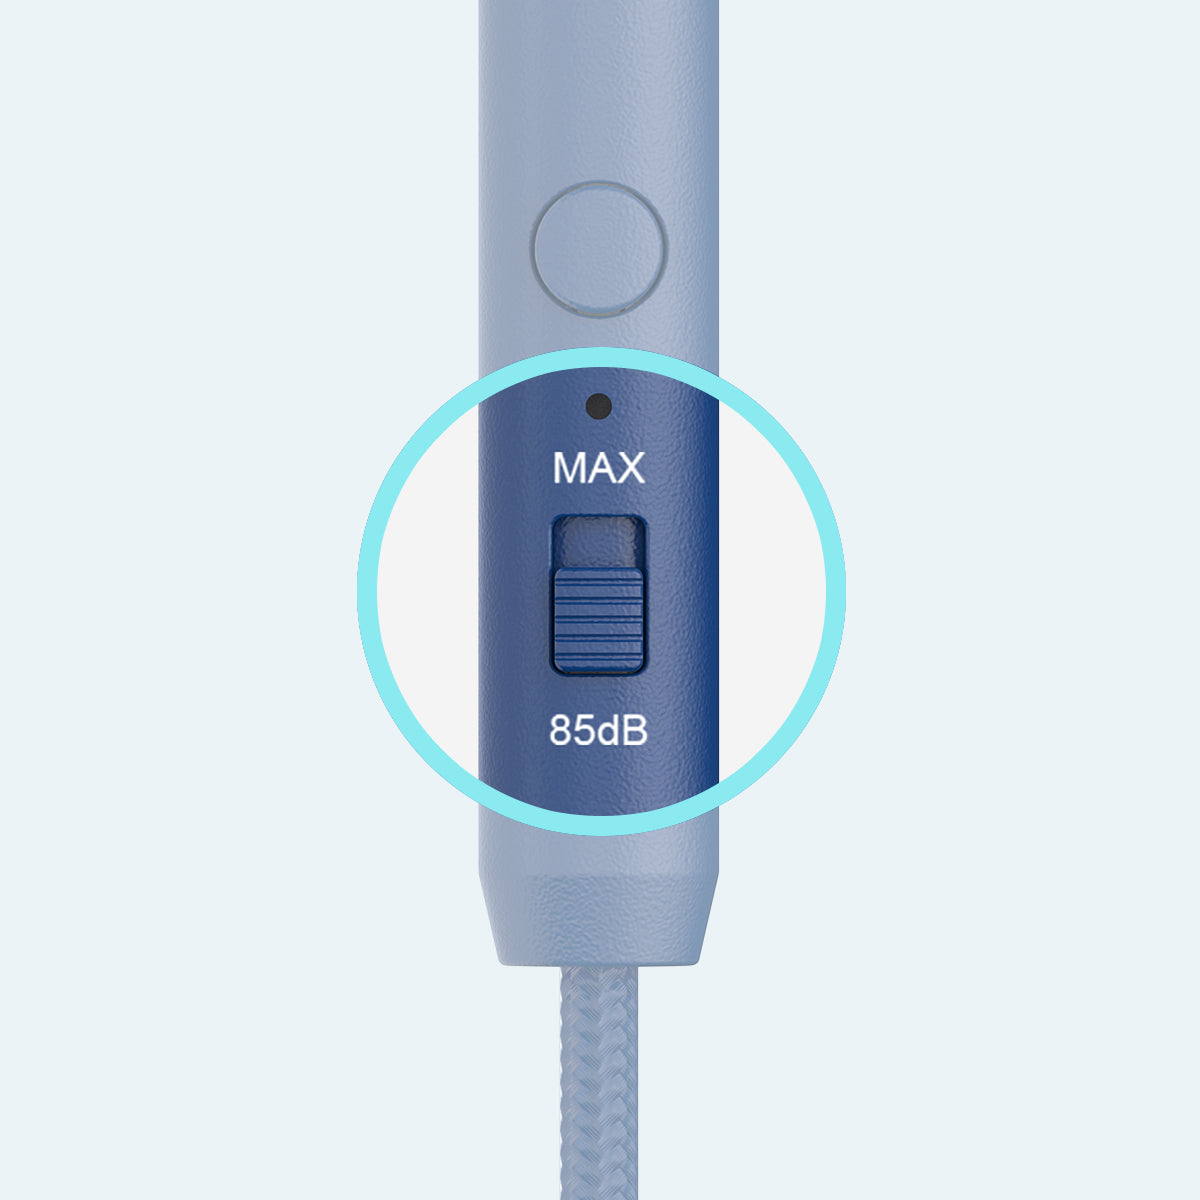 Close-up view of a device, likely a headphone cable, with a volume control feature highlighted by a blue circle indicating a maximum limit of 85 decibels.